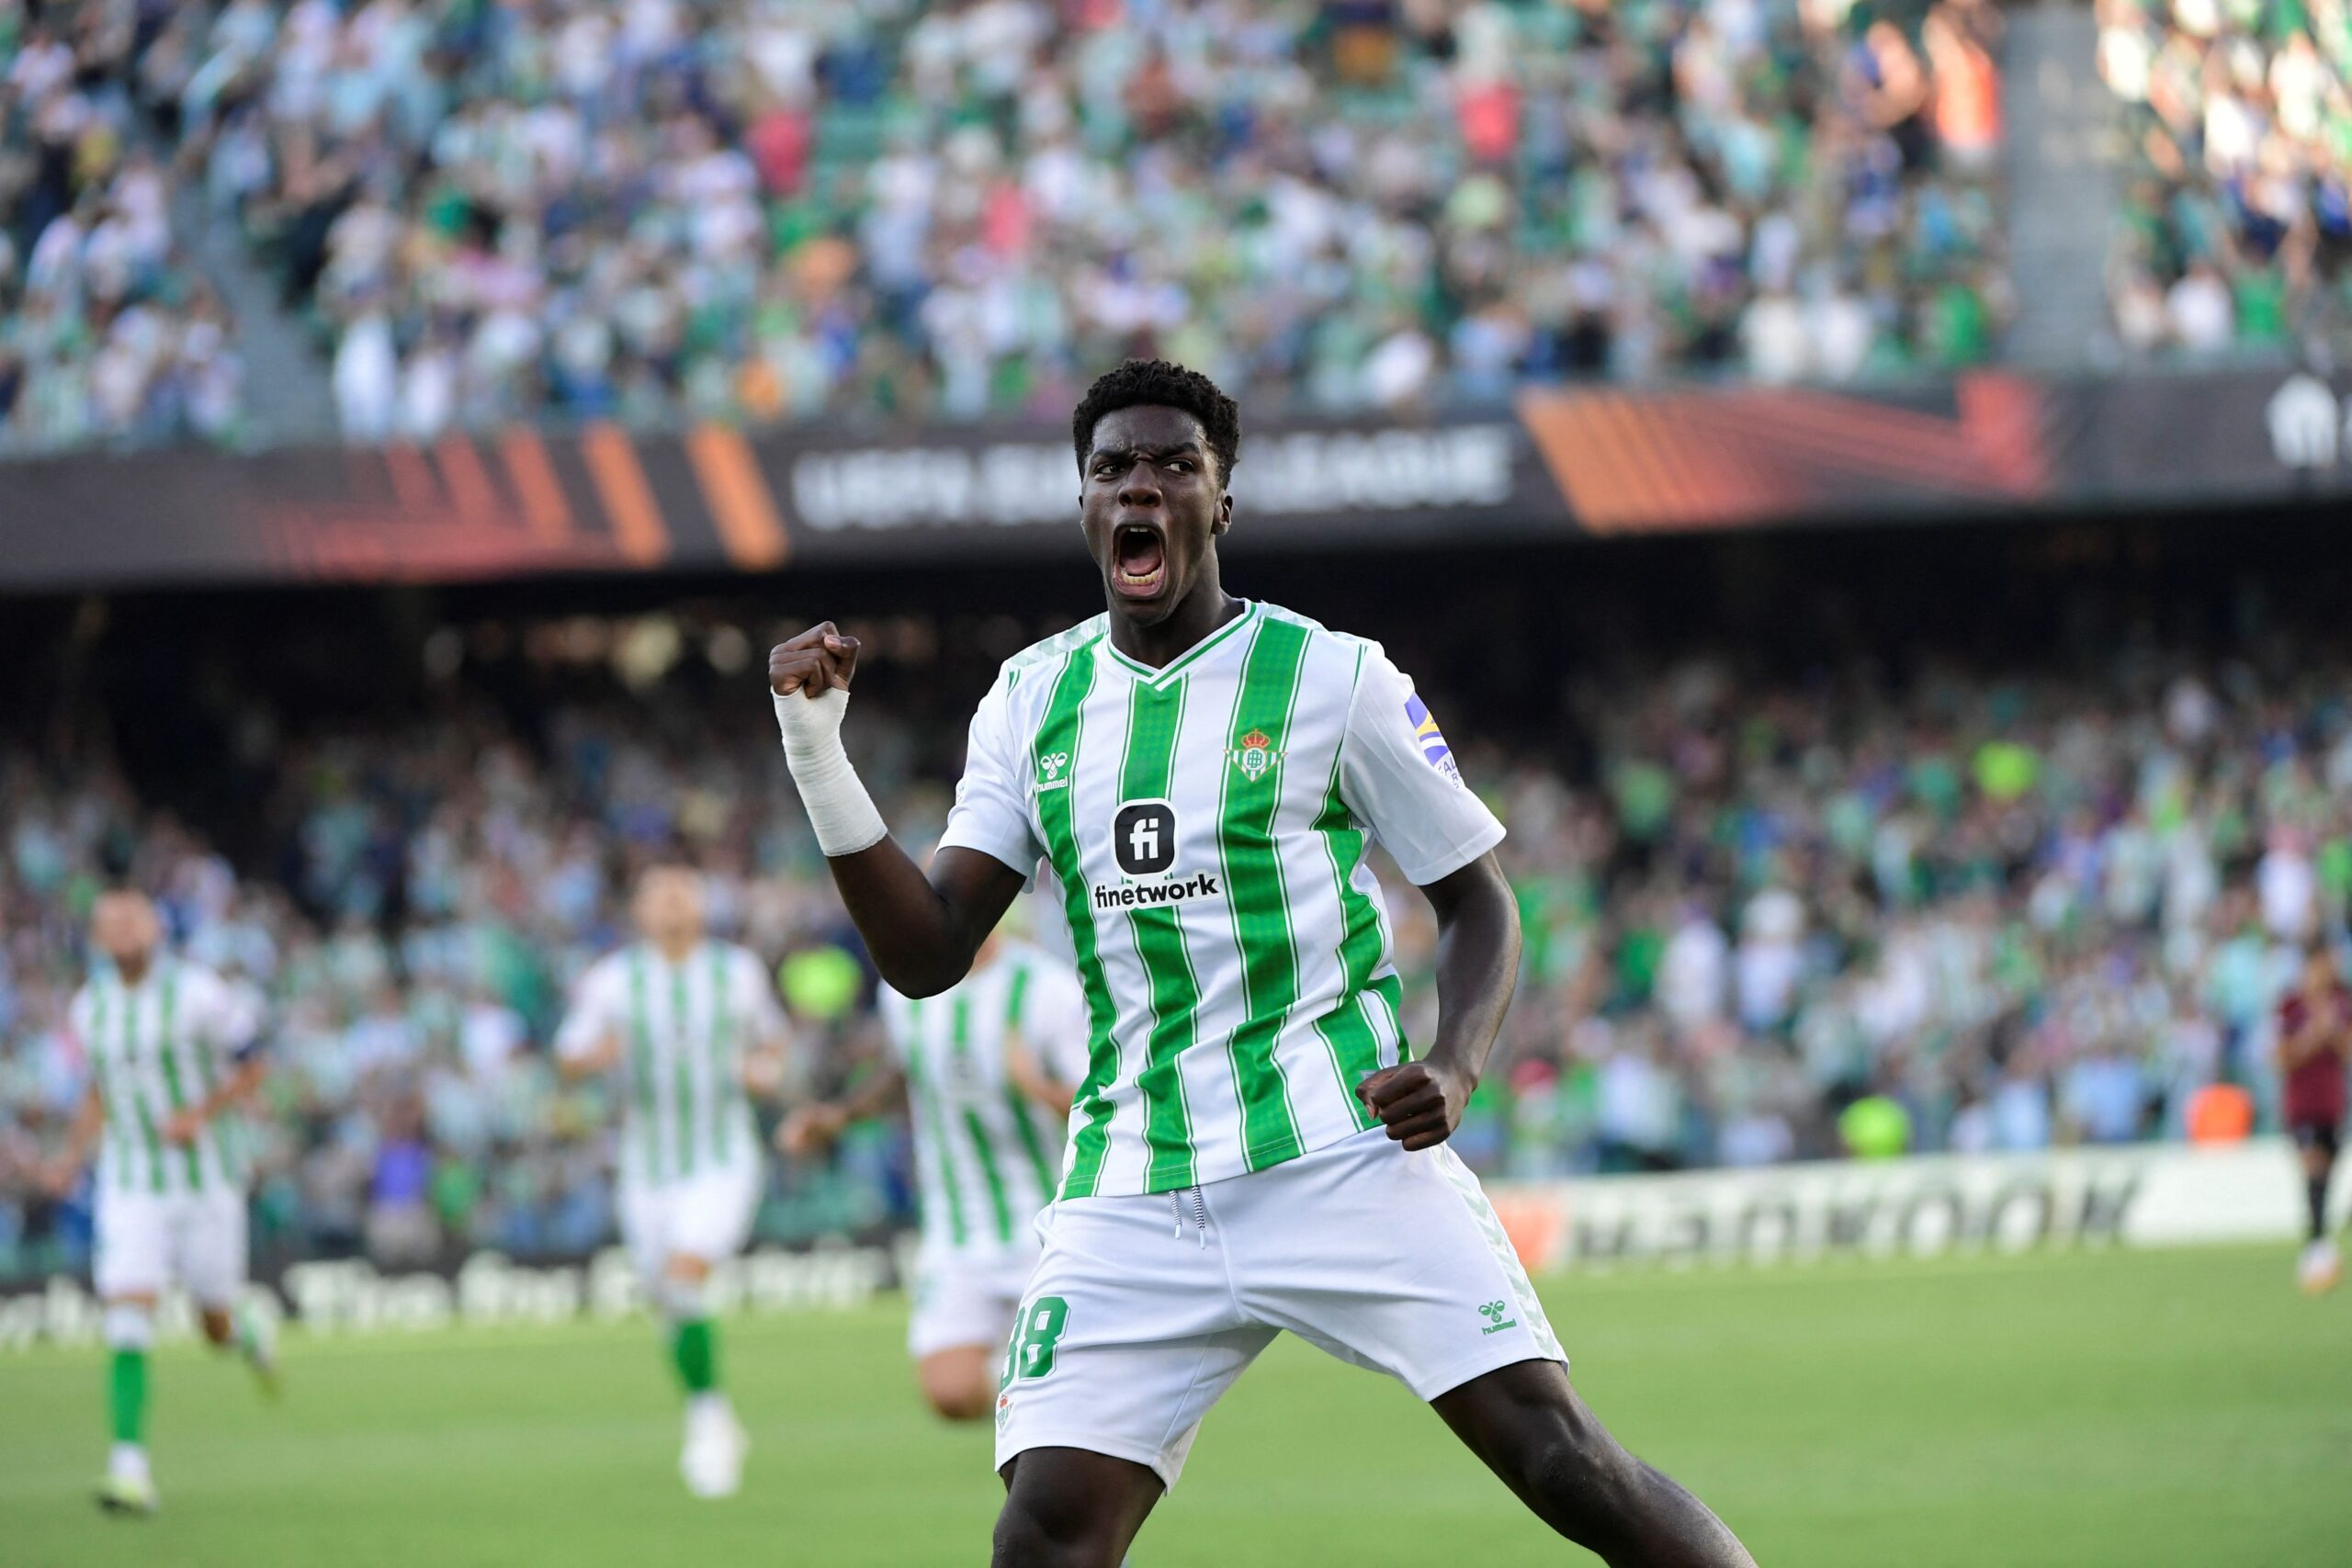 Real Betis' Spanish midfielder #38 Assane Diao celebrates scoring his team's first goal during the UEFA Europa League 1st round day 2 Group C football match between Real Betis and AC Sparta Praha at the Benito Villamarin stadium in Seville on October 5, 2023. (Photo by CRISTINA QUICLER / AFP) (Photo by CRISTINA QUICLER/AFP via Getty Images)